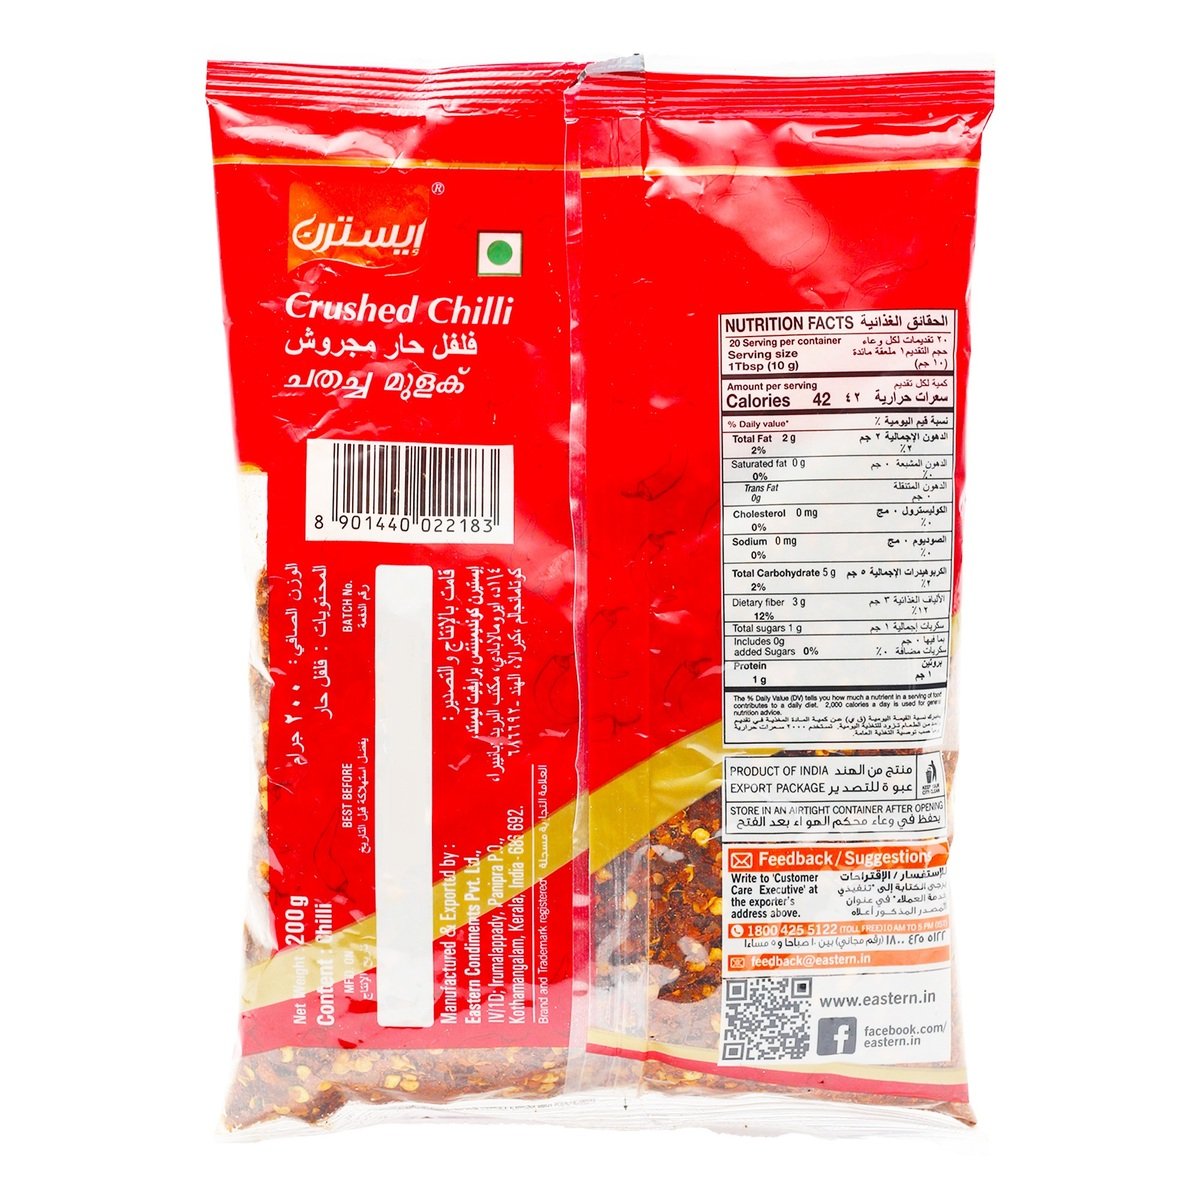 Eastern Crushed Chilli 200 g